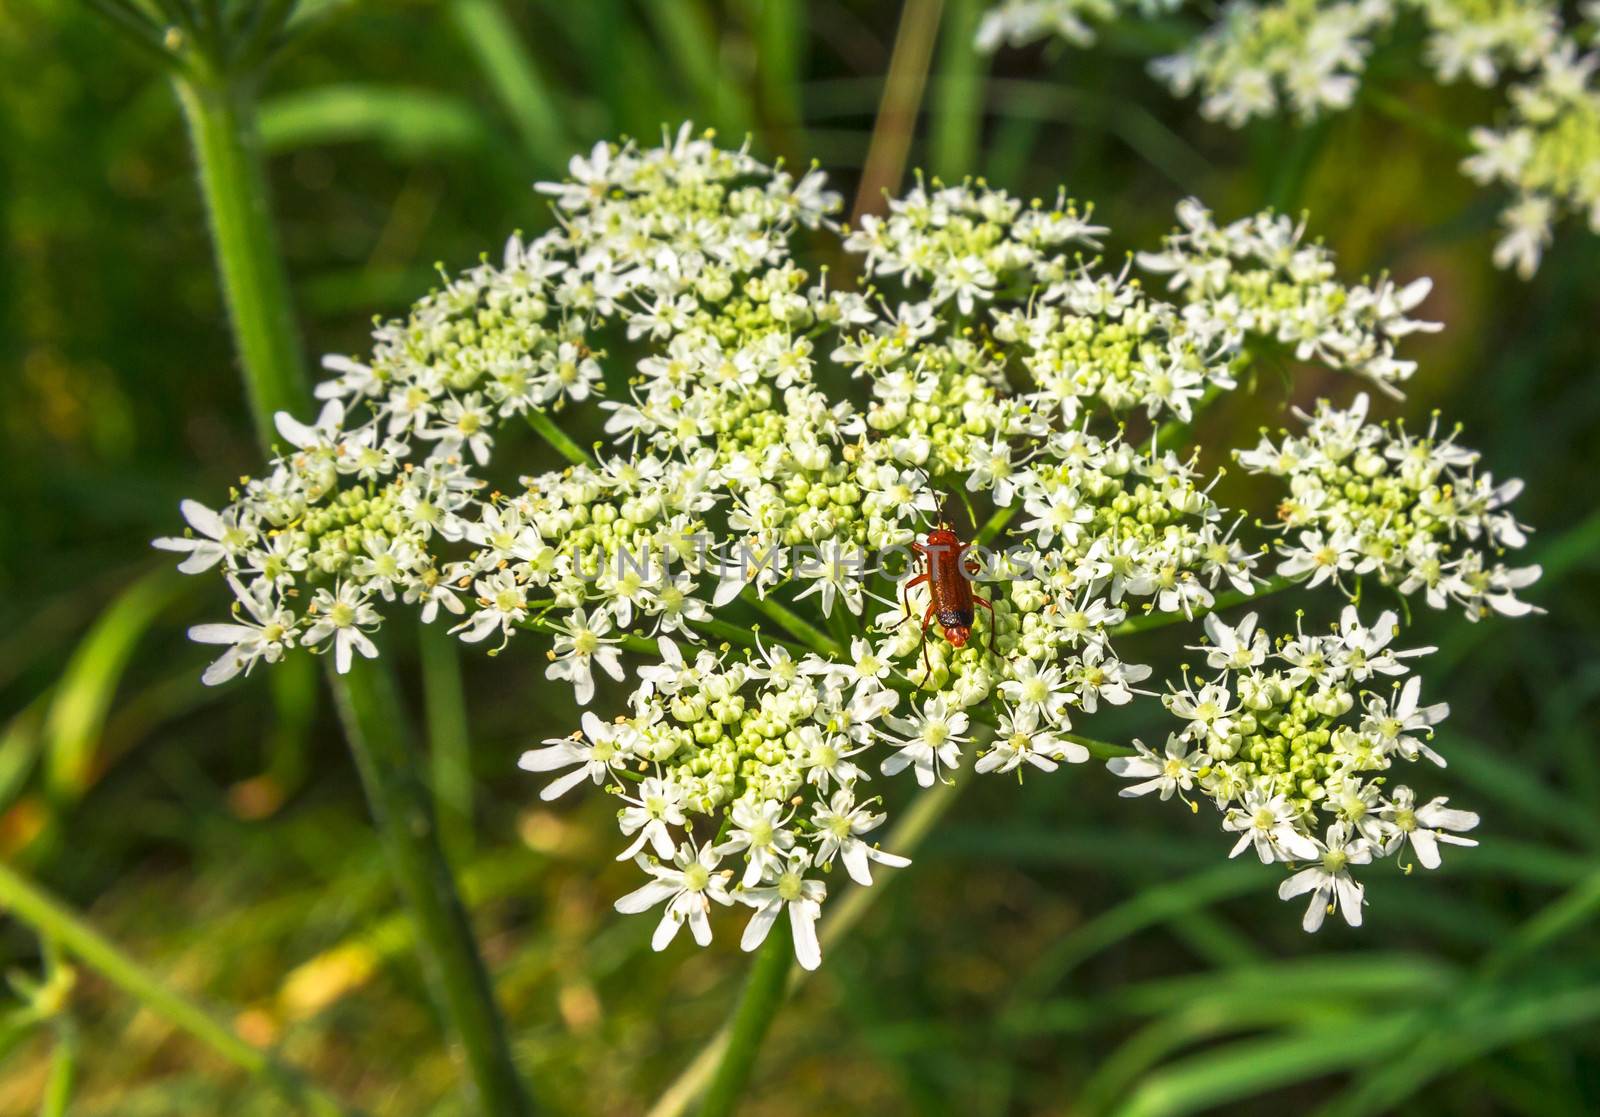 Common red soldier beetle on a white inflorescence